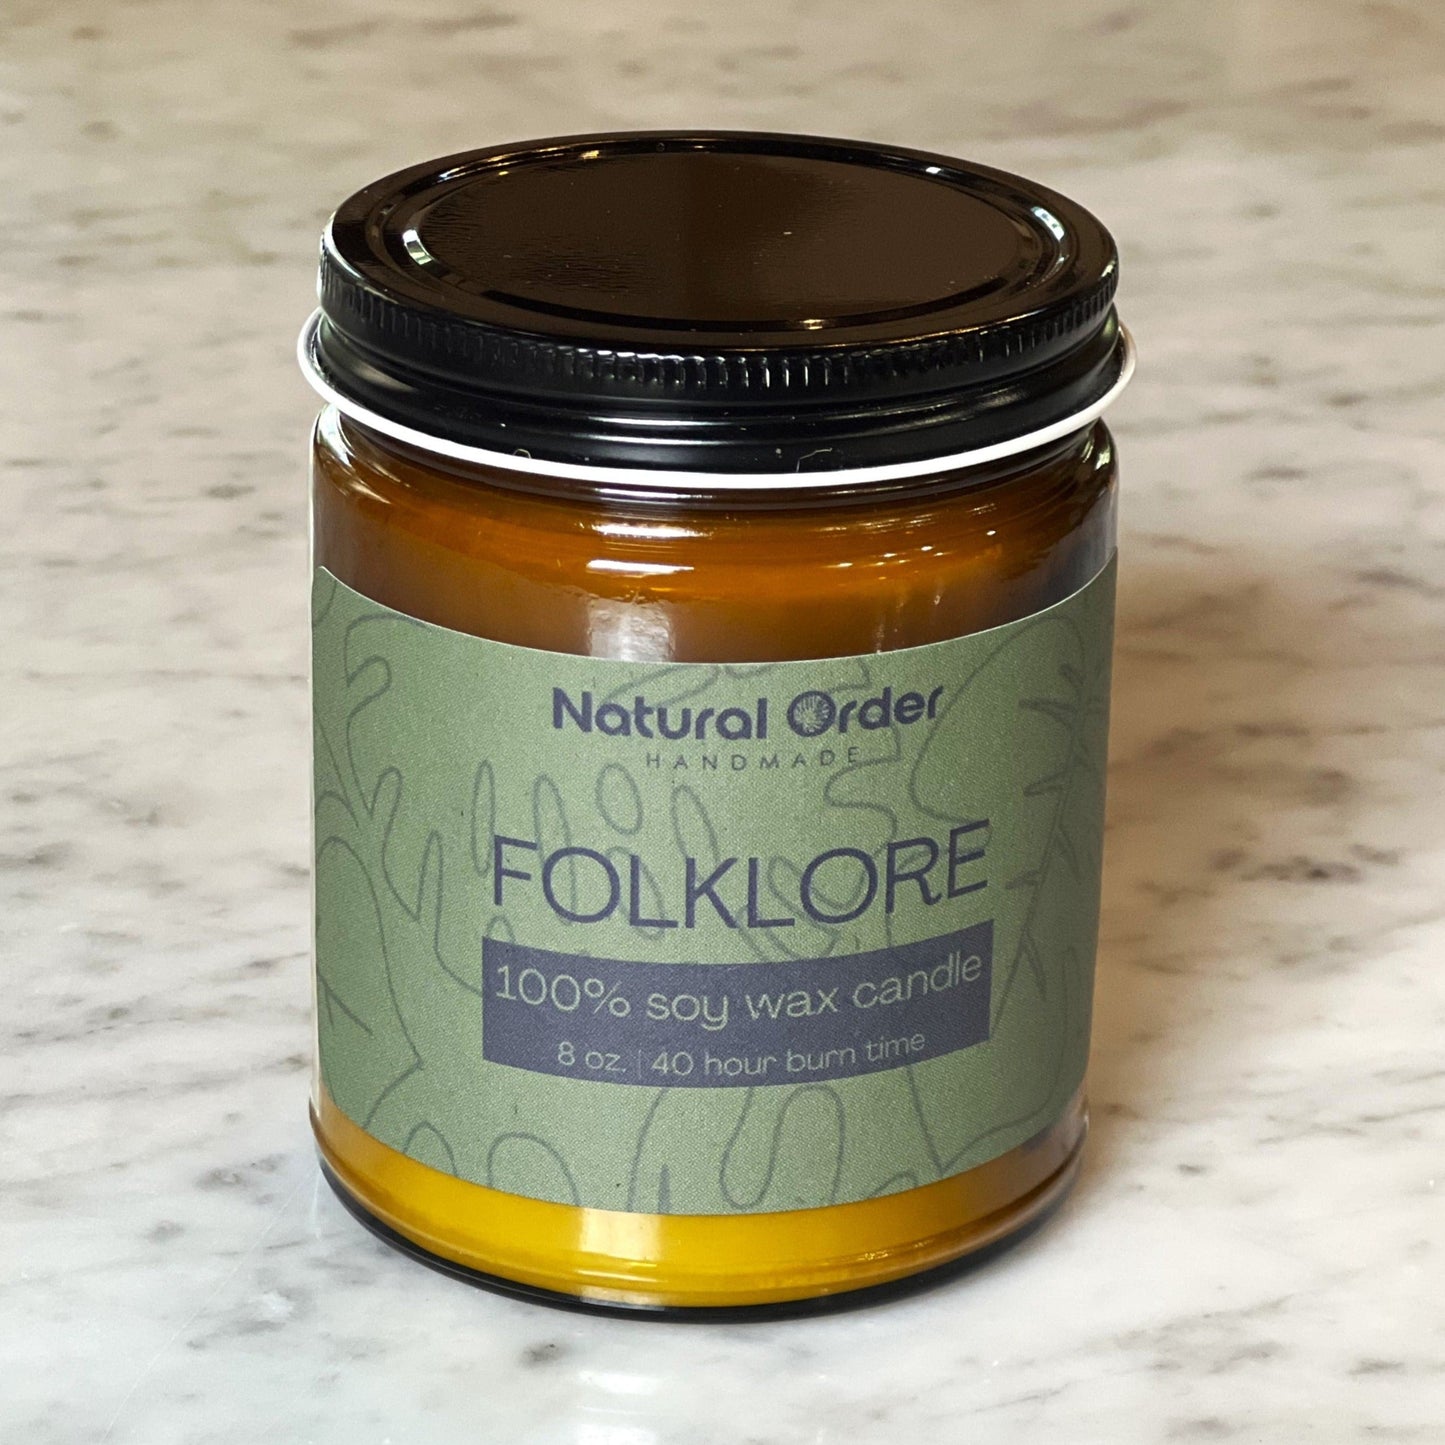 Folklore Soy Candle 8 ounce